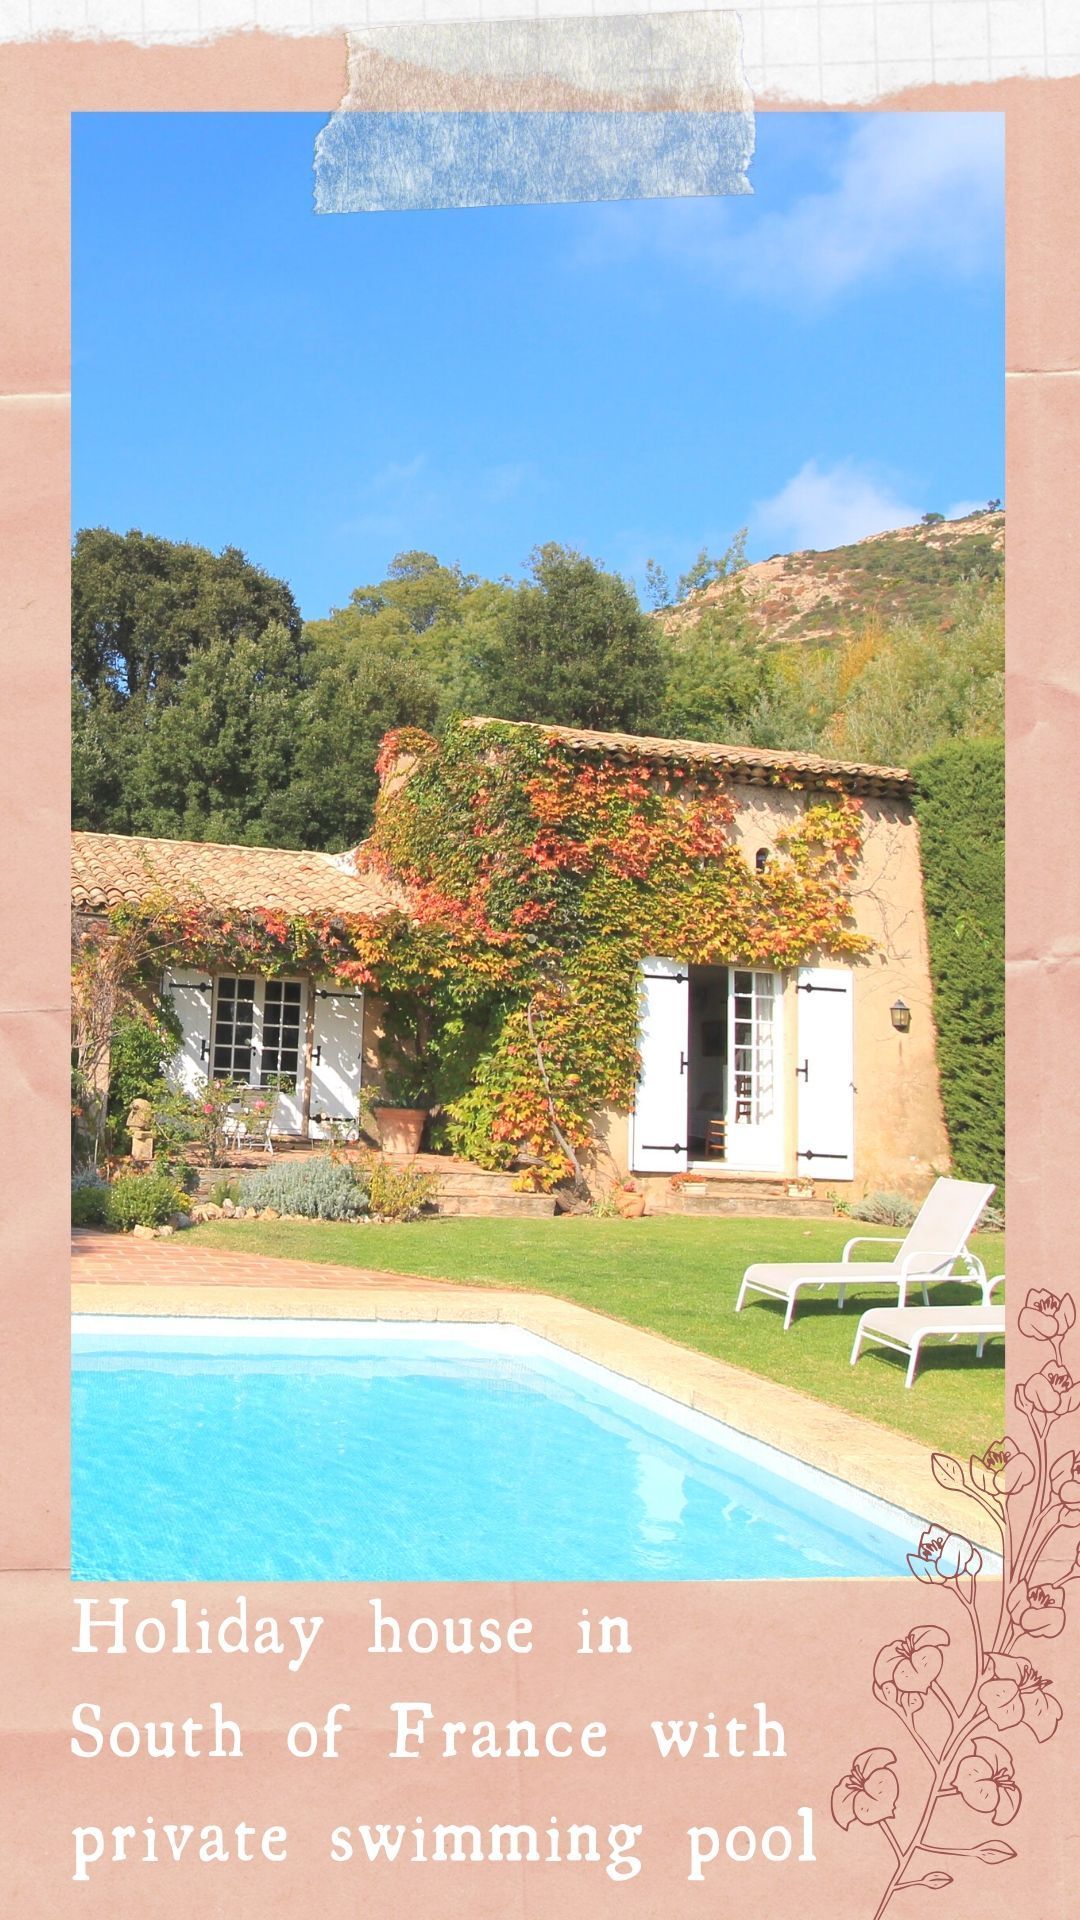 Stay in this villa with private swimming pool in the centre of nature рџЊє -   18 holiday Home france ideas